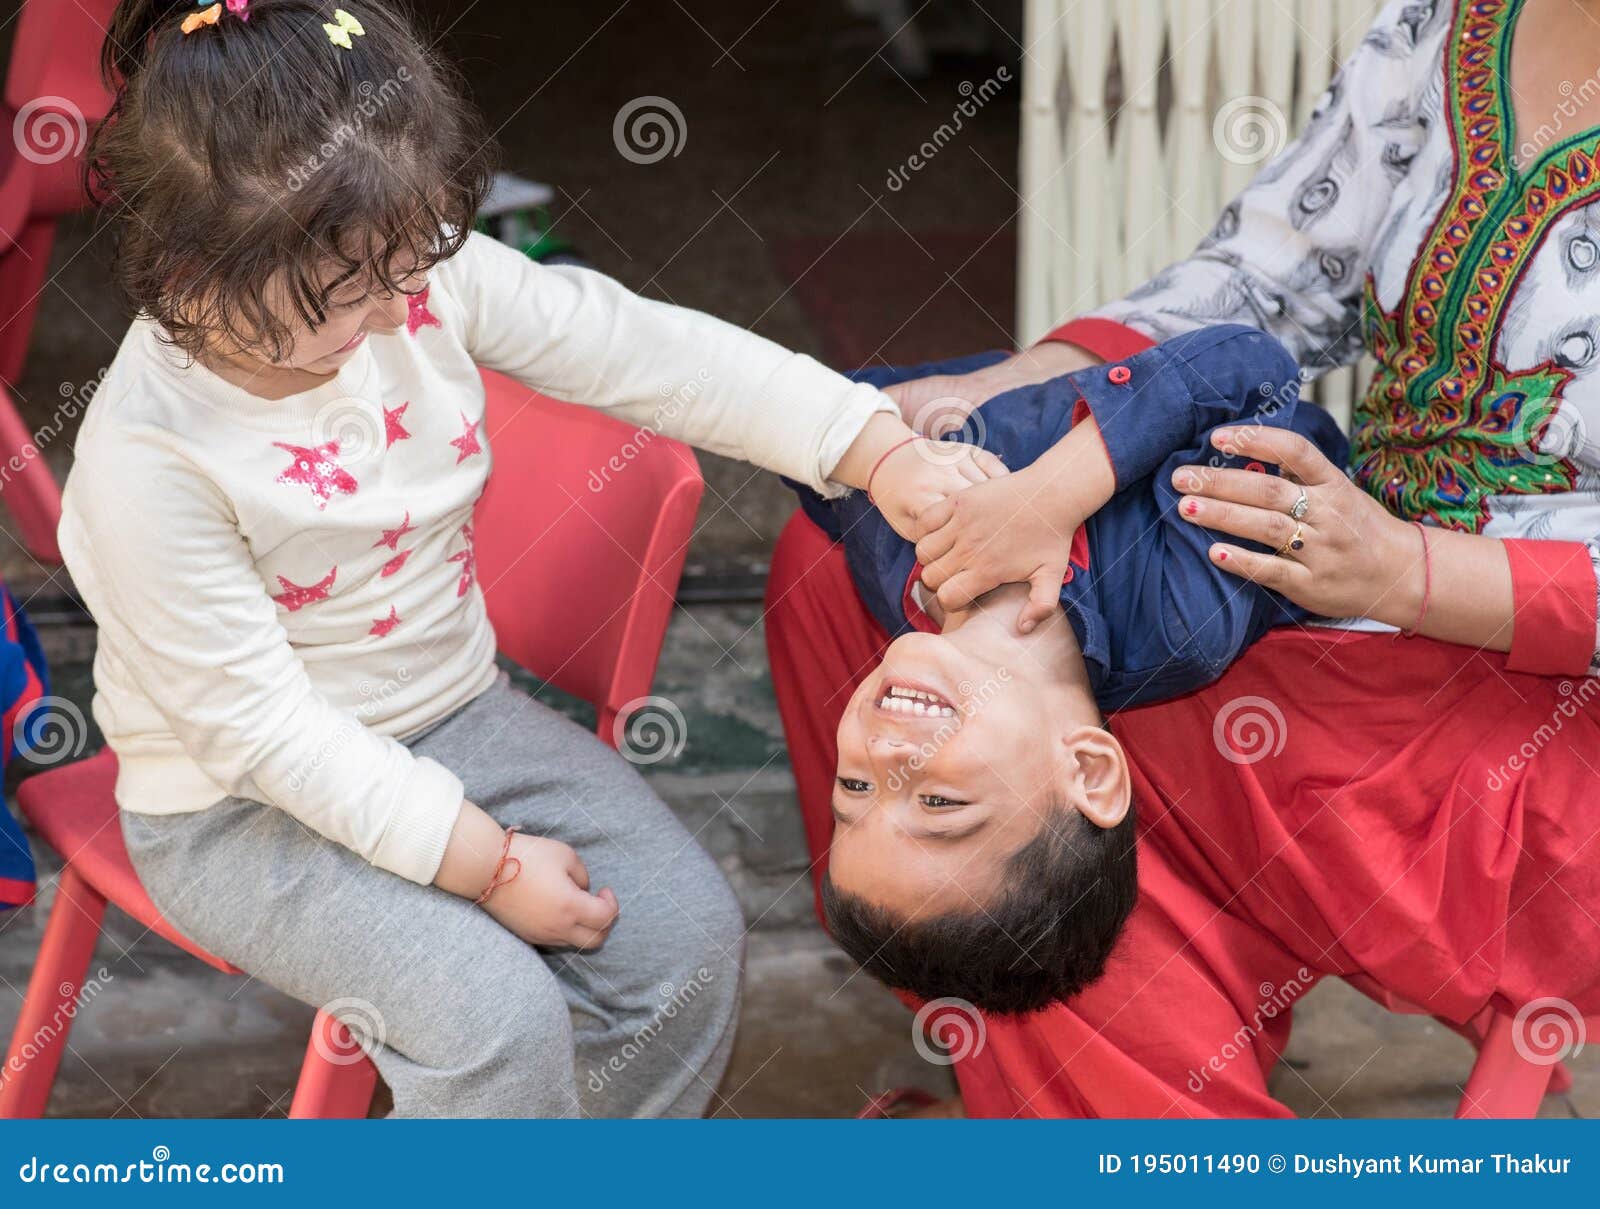 kids having fun at home, tickling and giggle.